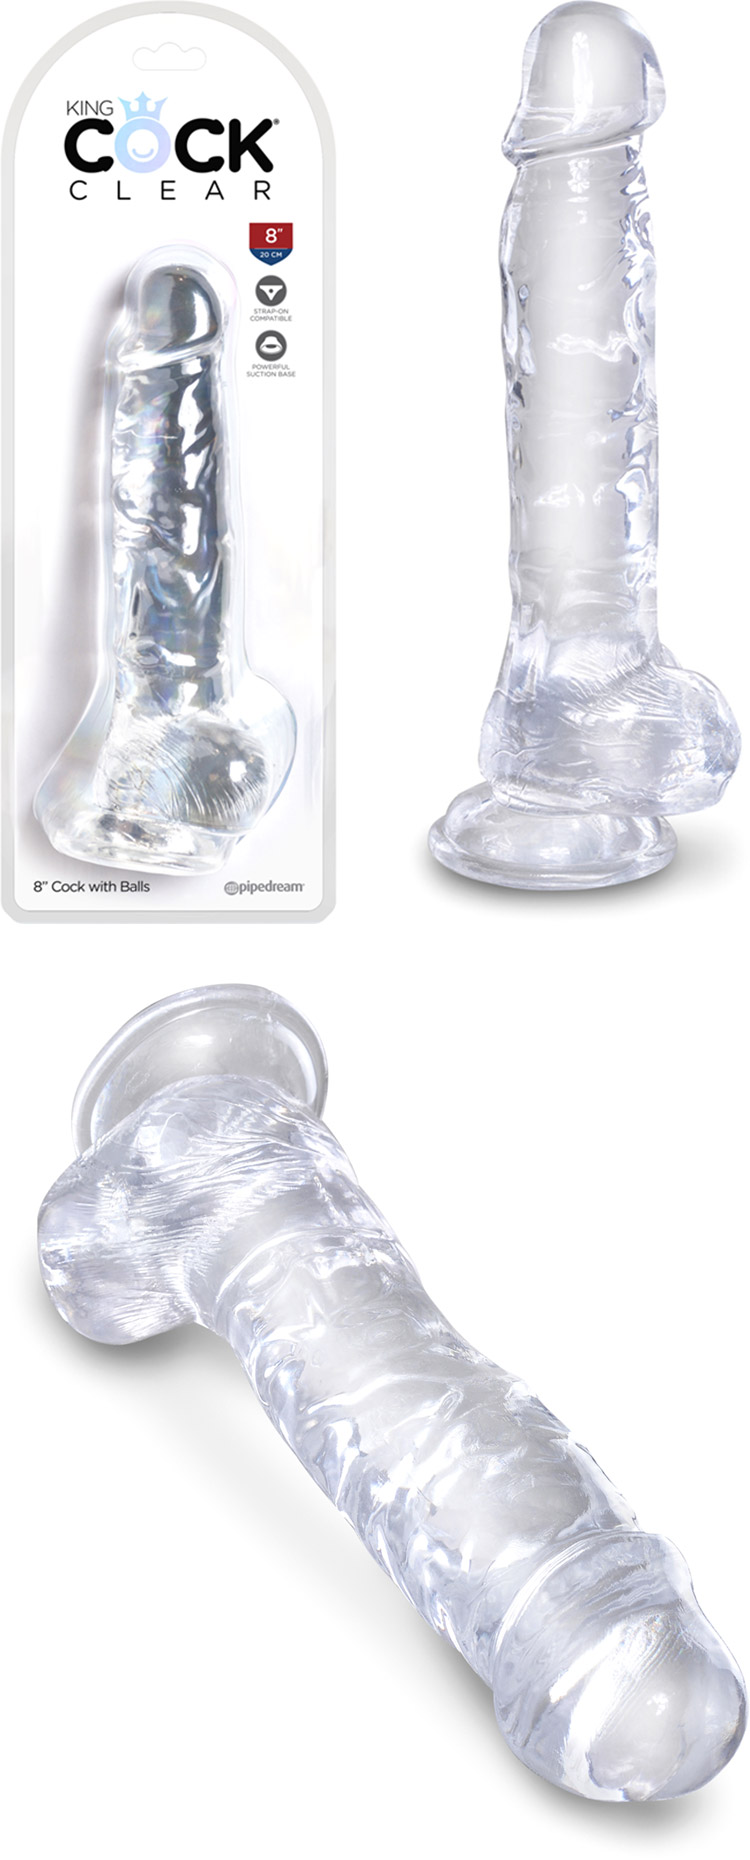 King Cock realistic dildo with testicles - 18 cm - See-through